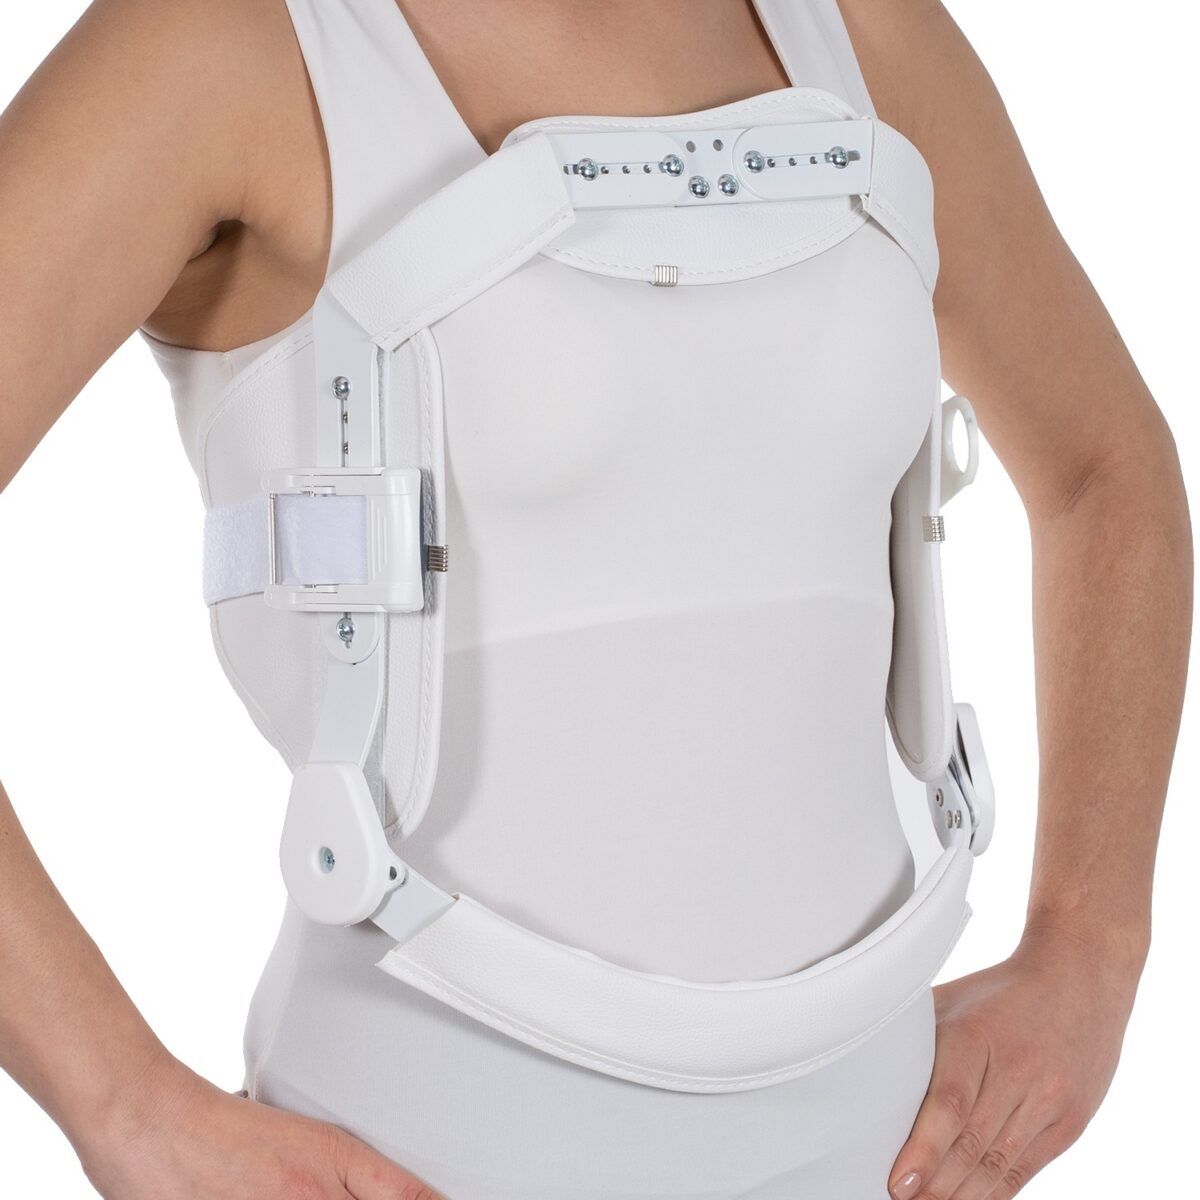 wingmed orthopedic equipments W431 dynamic hiperextension corset 57